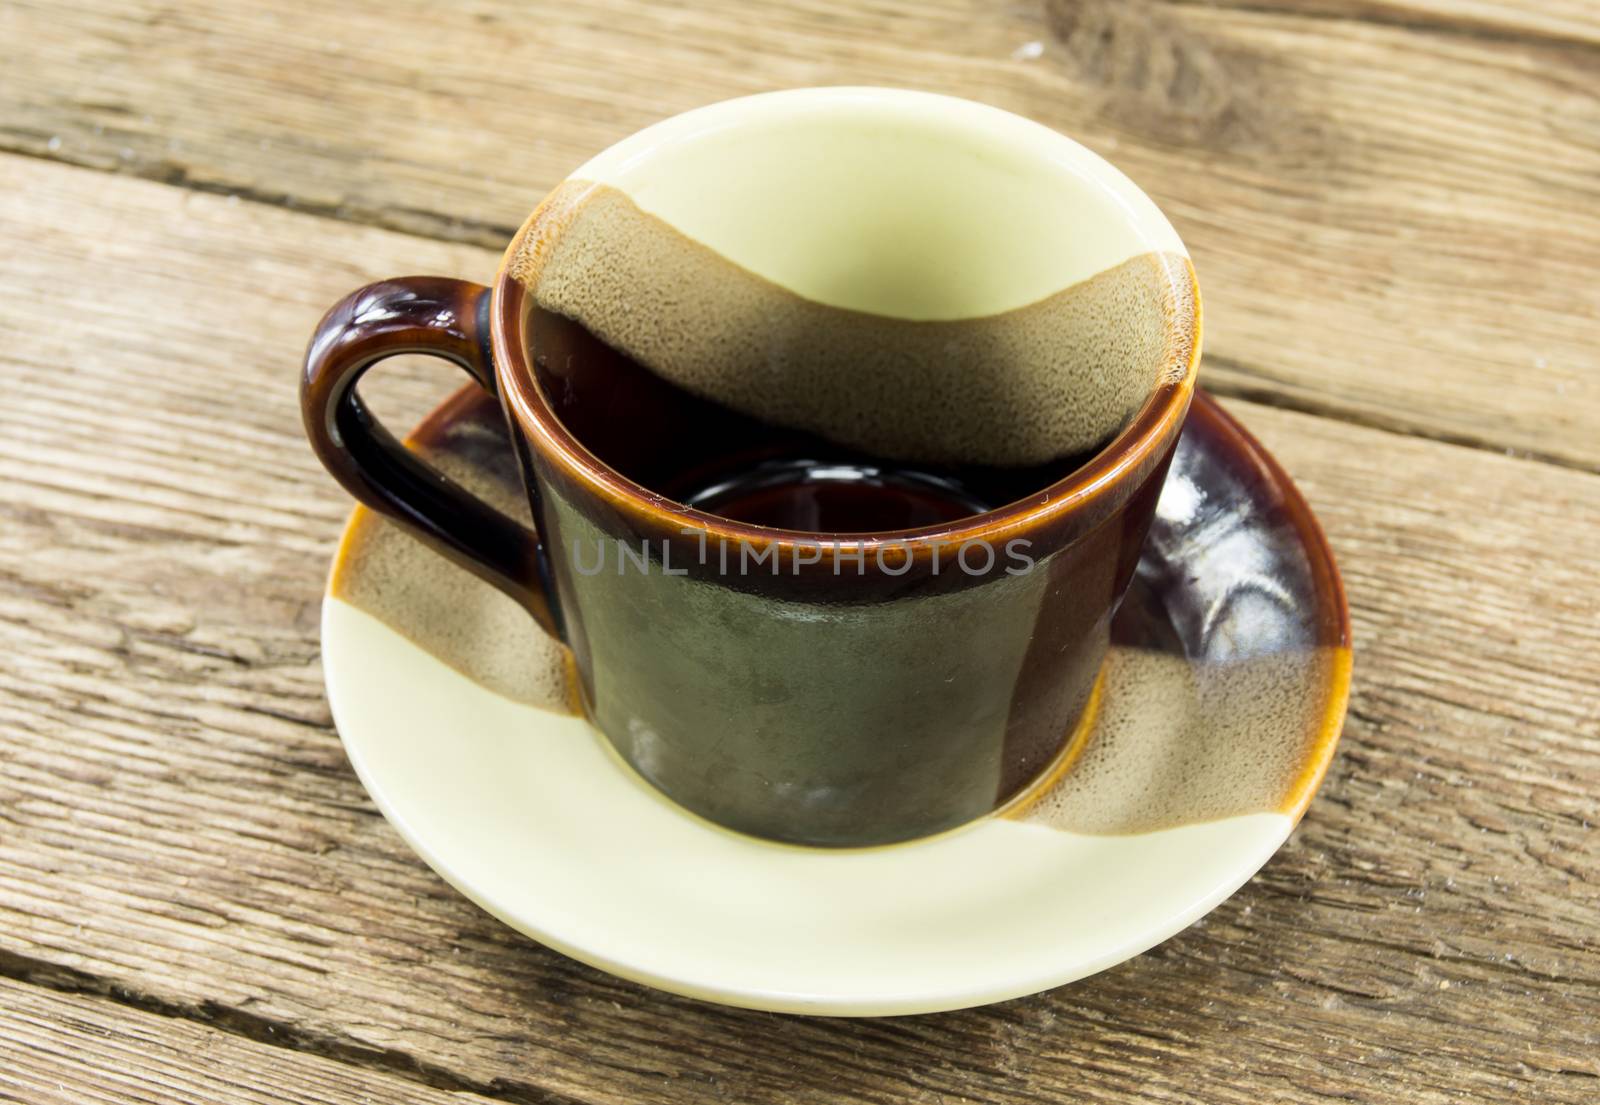 Cup of coffee on a wooden background. For your commercial and editorial use.